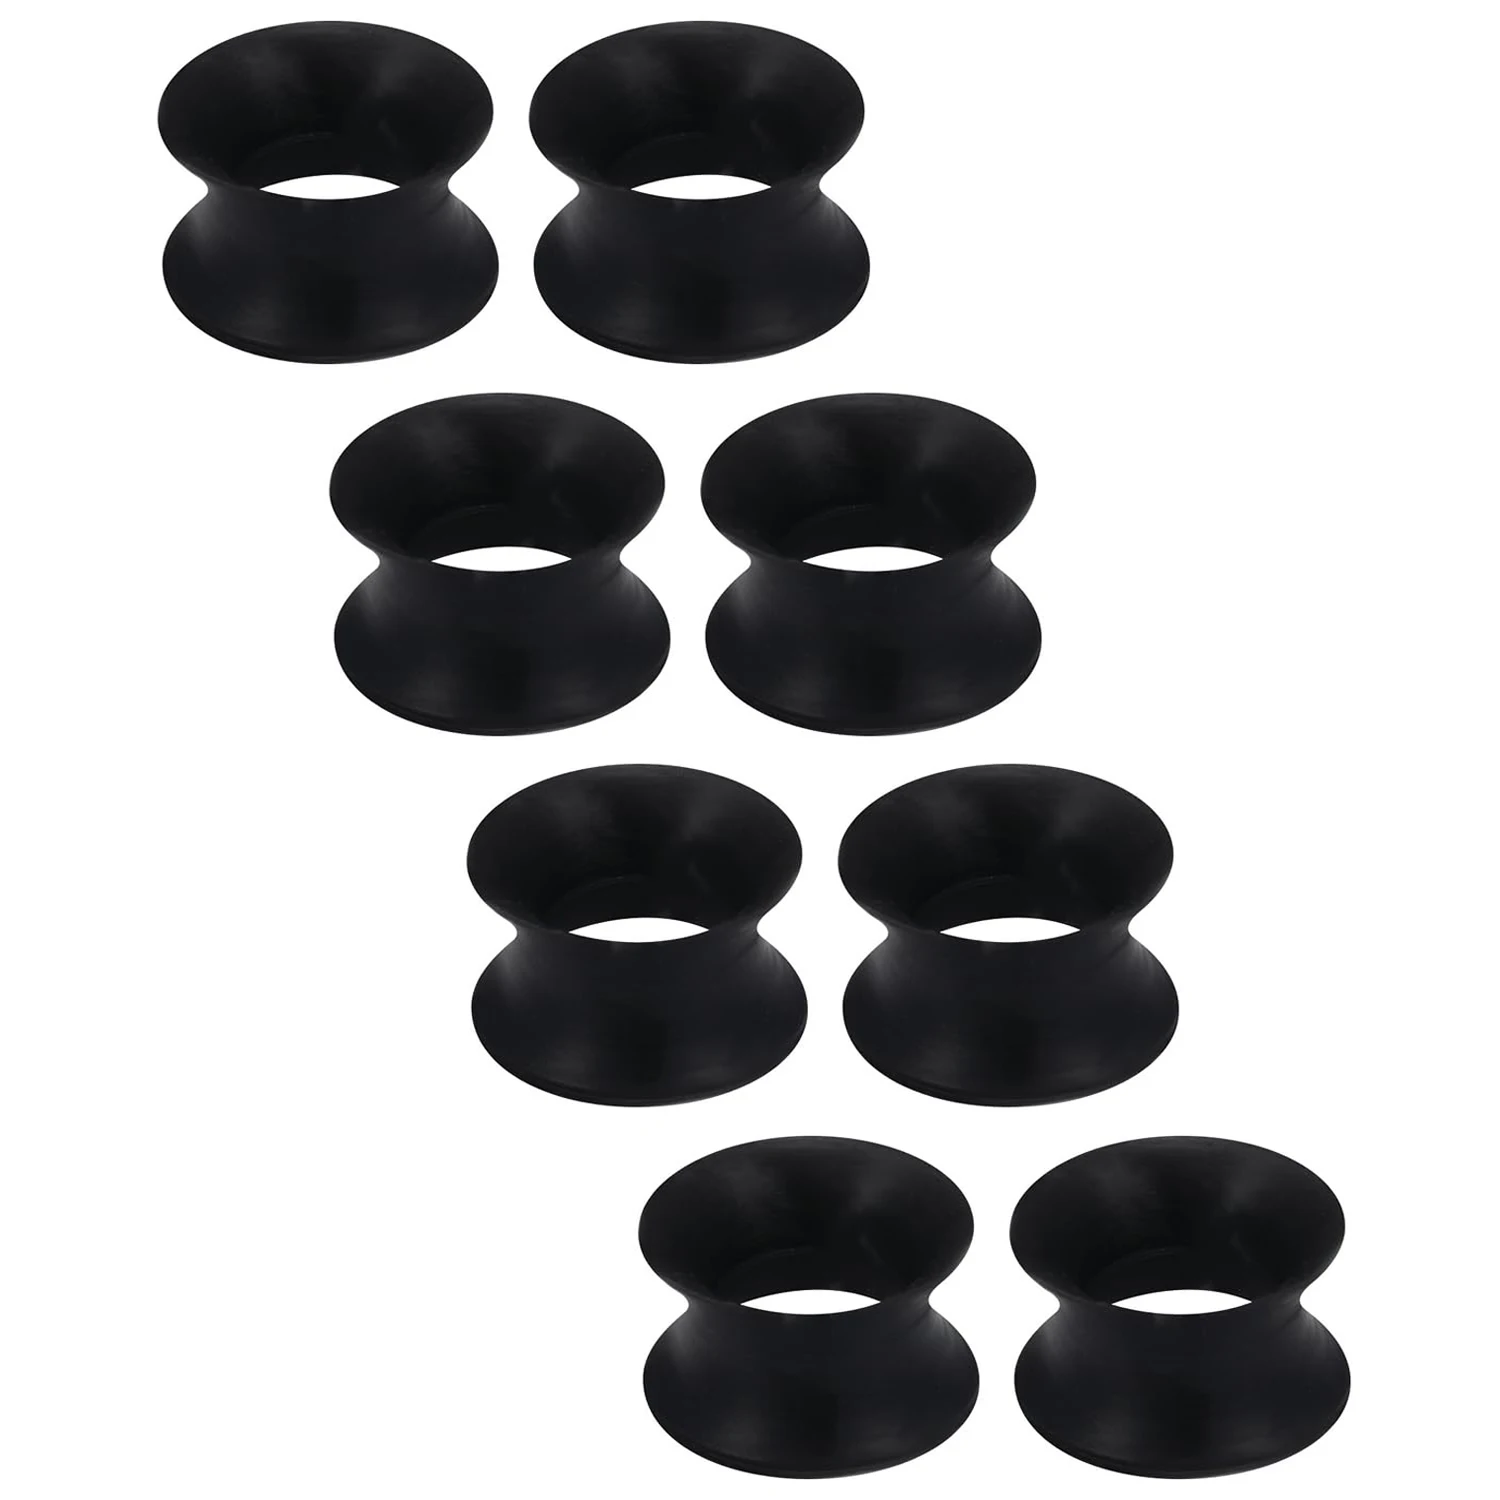 

4 Pairs Black White Clear Ultra Thin Silicone Double Flared Flexible Tunnel Ear Expander Stretching Plug Earrings Set 3mm-38mm